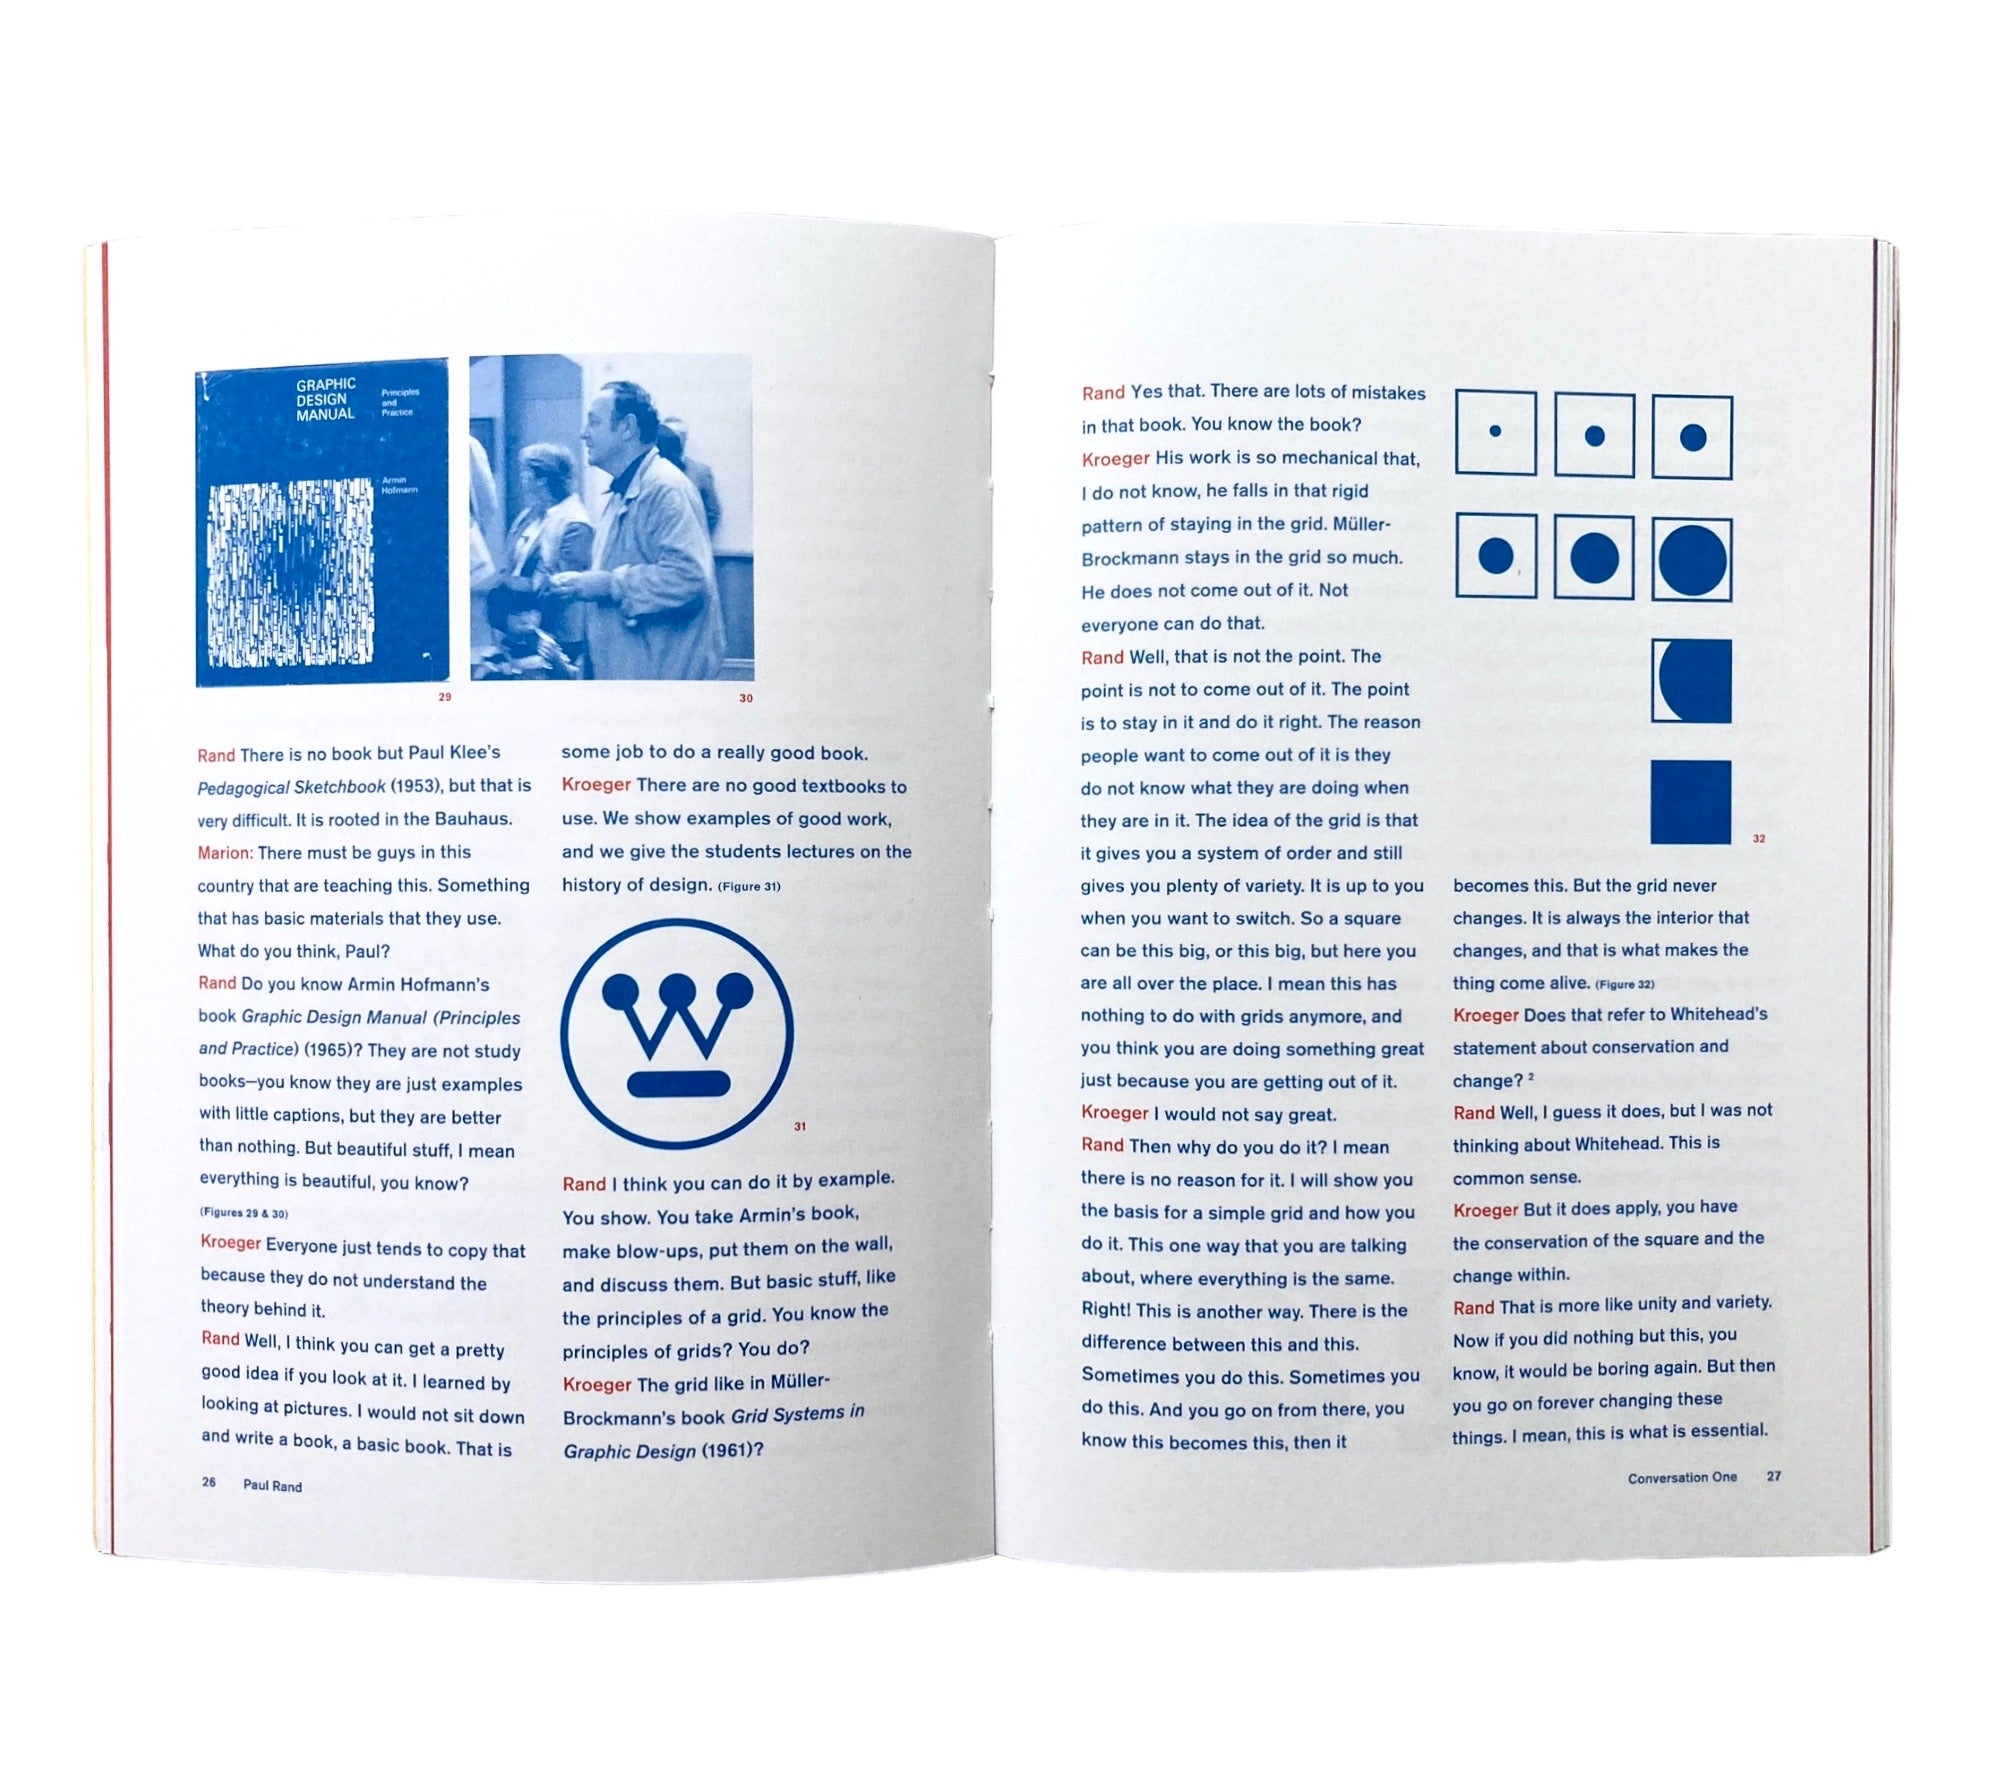 Paul Rand: Conversations With Students